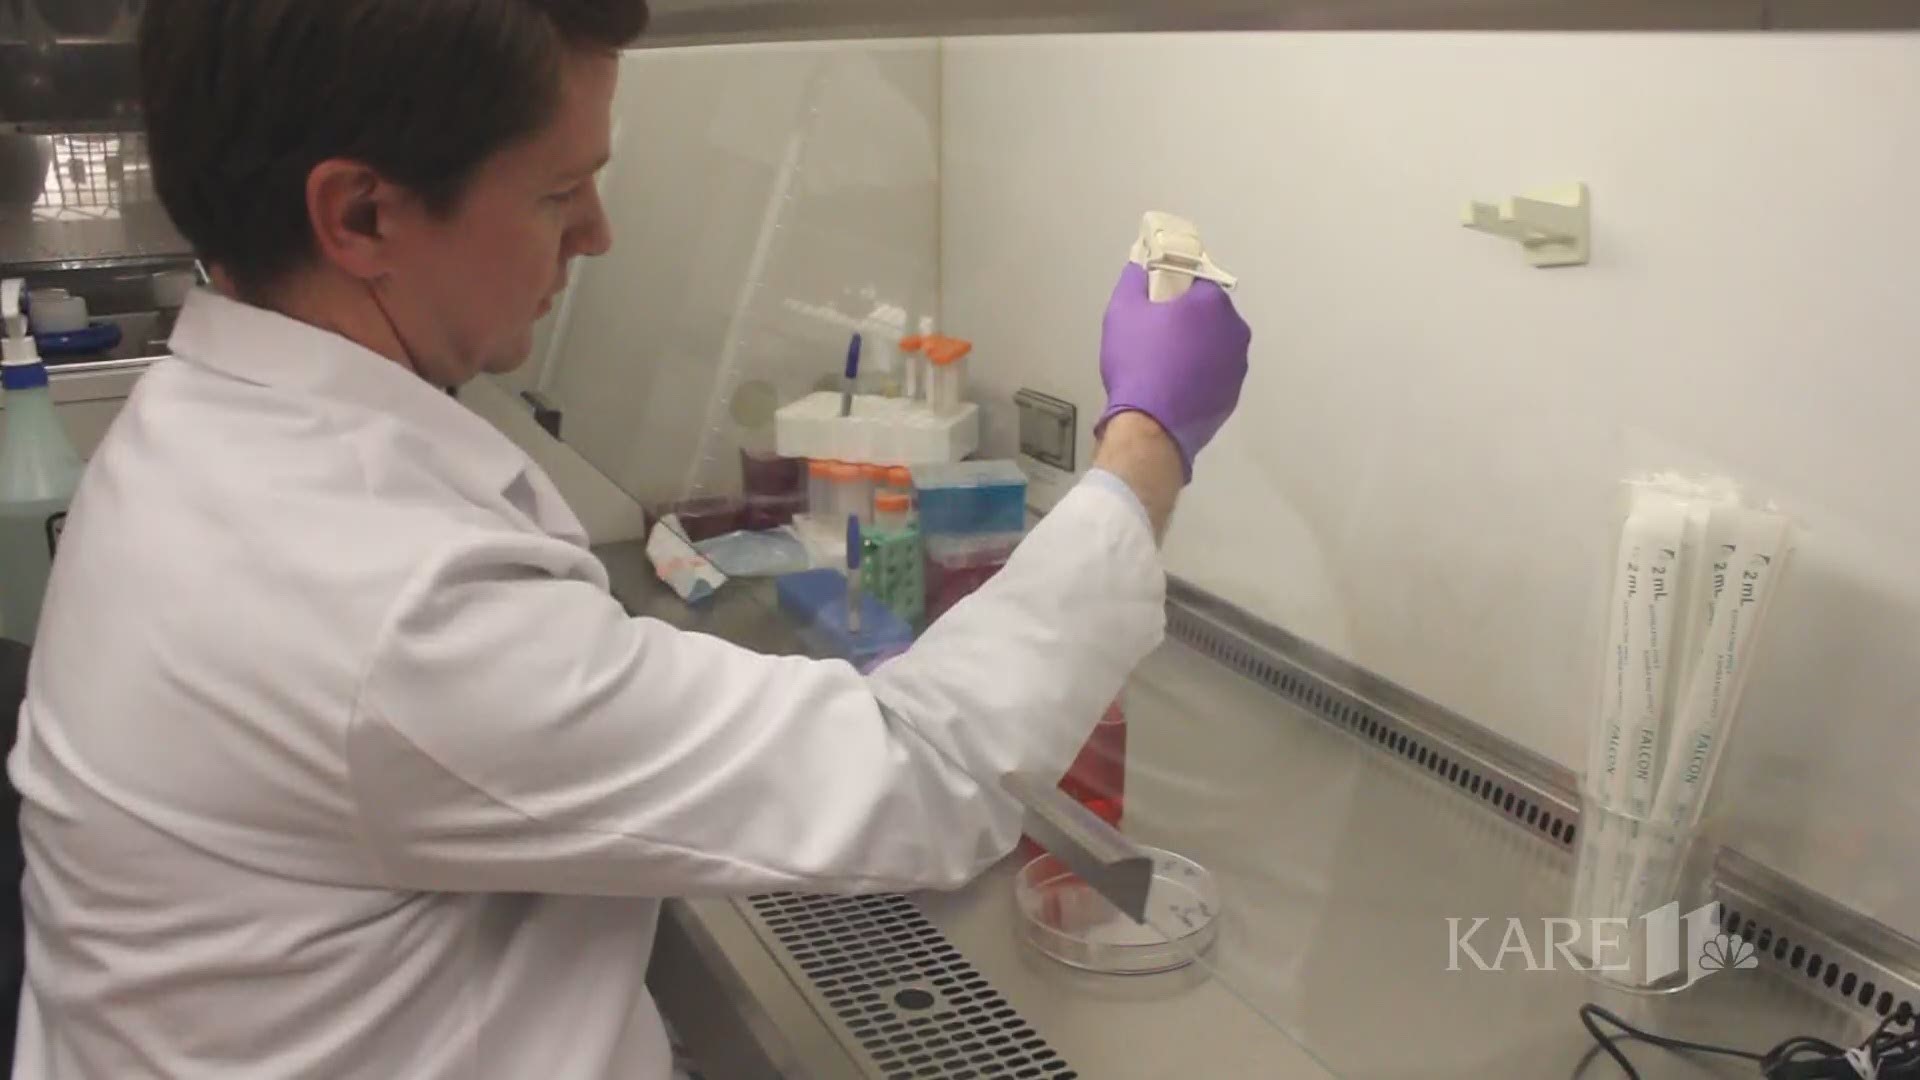 The research into Oncolytic Virus Therapy has been going on for years now. University of Minnesota researchers say they are excited about its ability to potentially kill cancer cells. https://kare11.tv/2SPtTT9